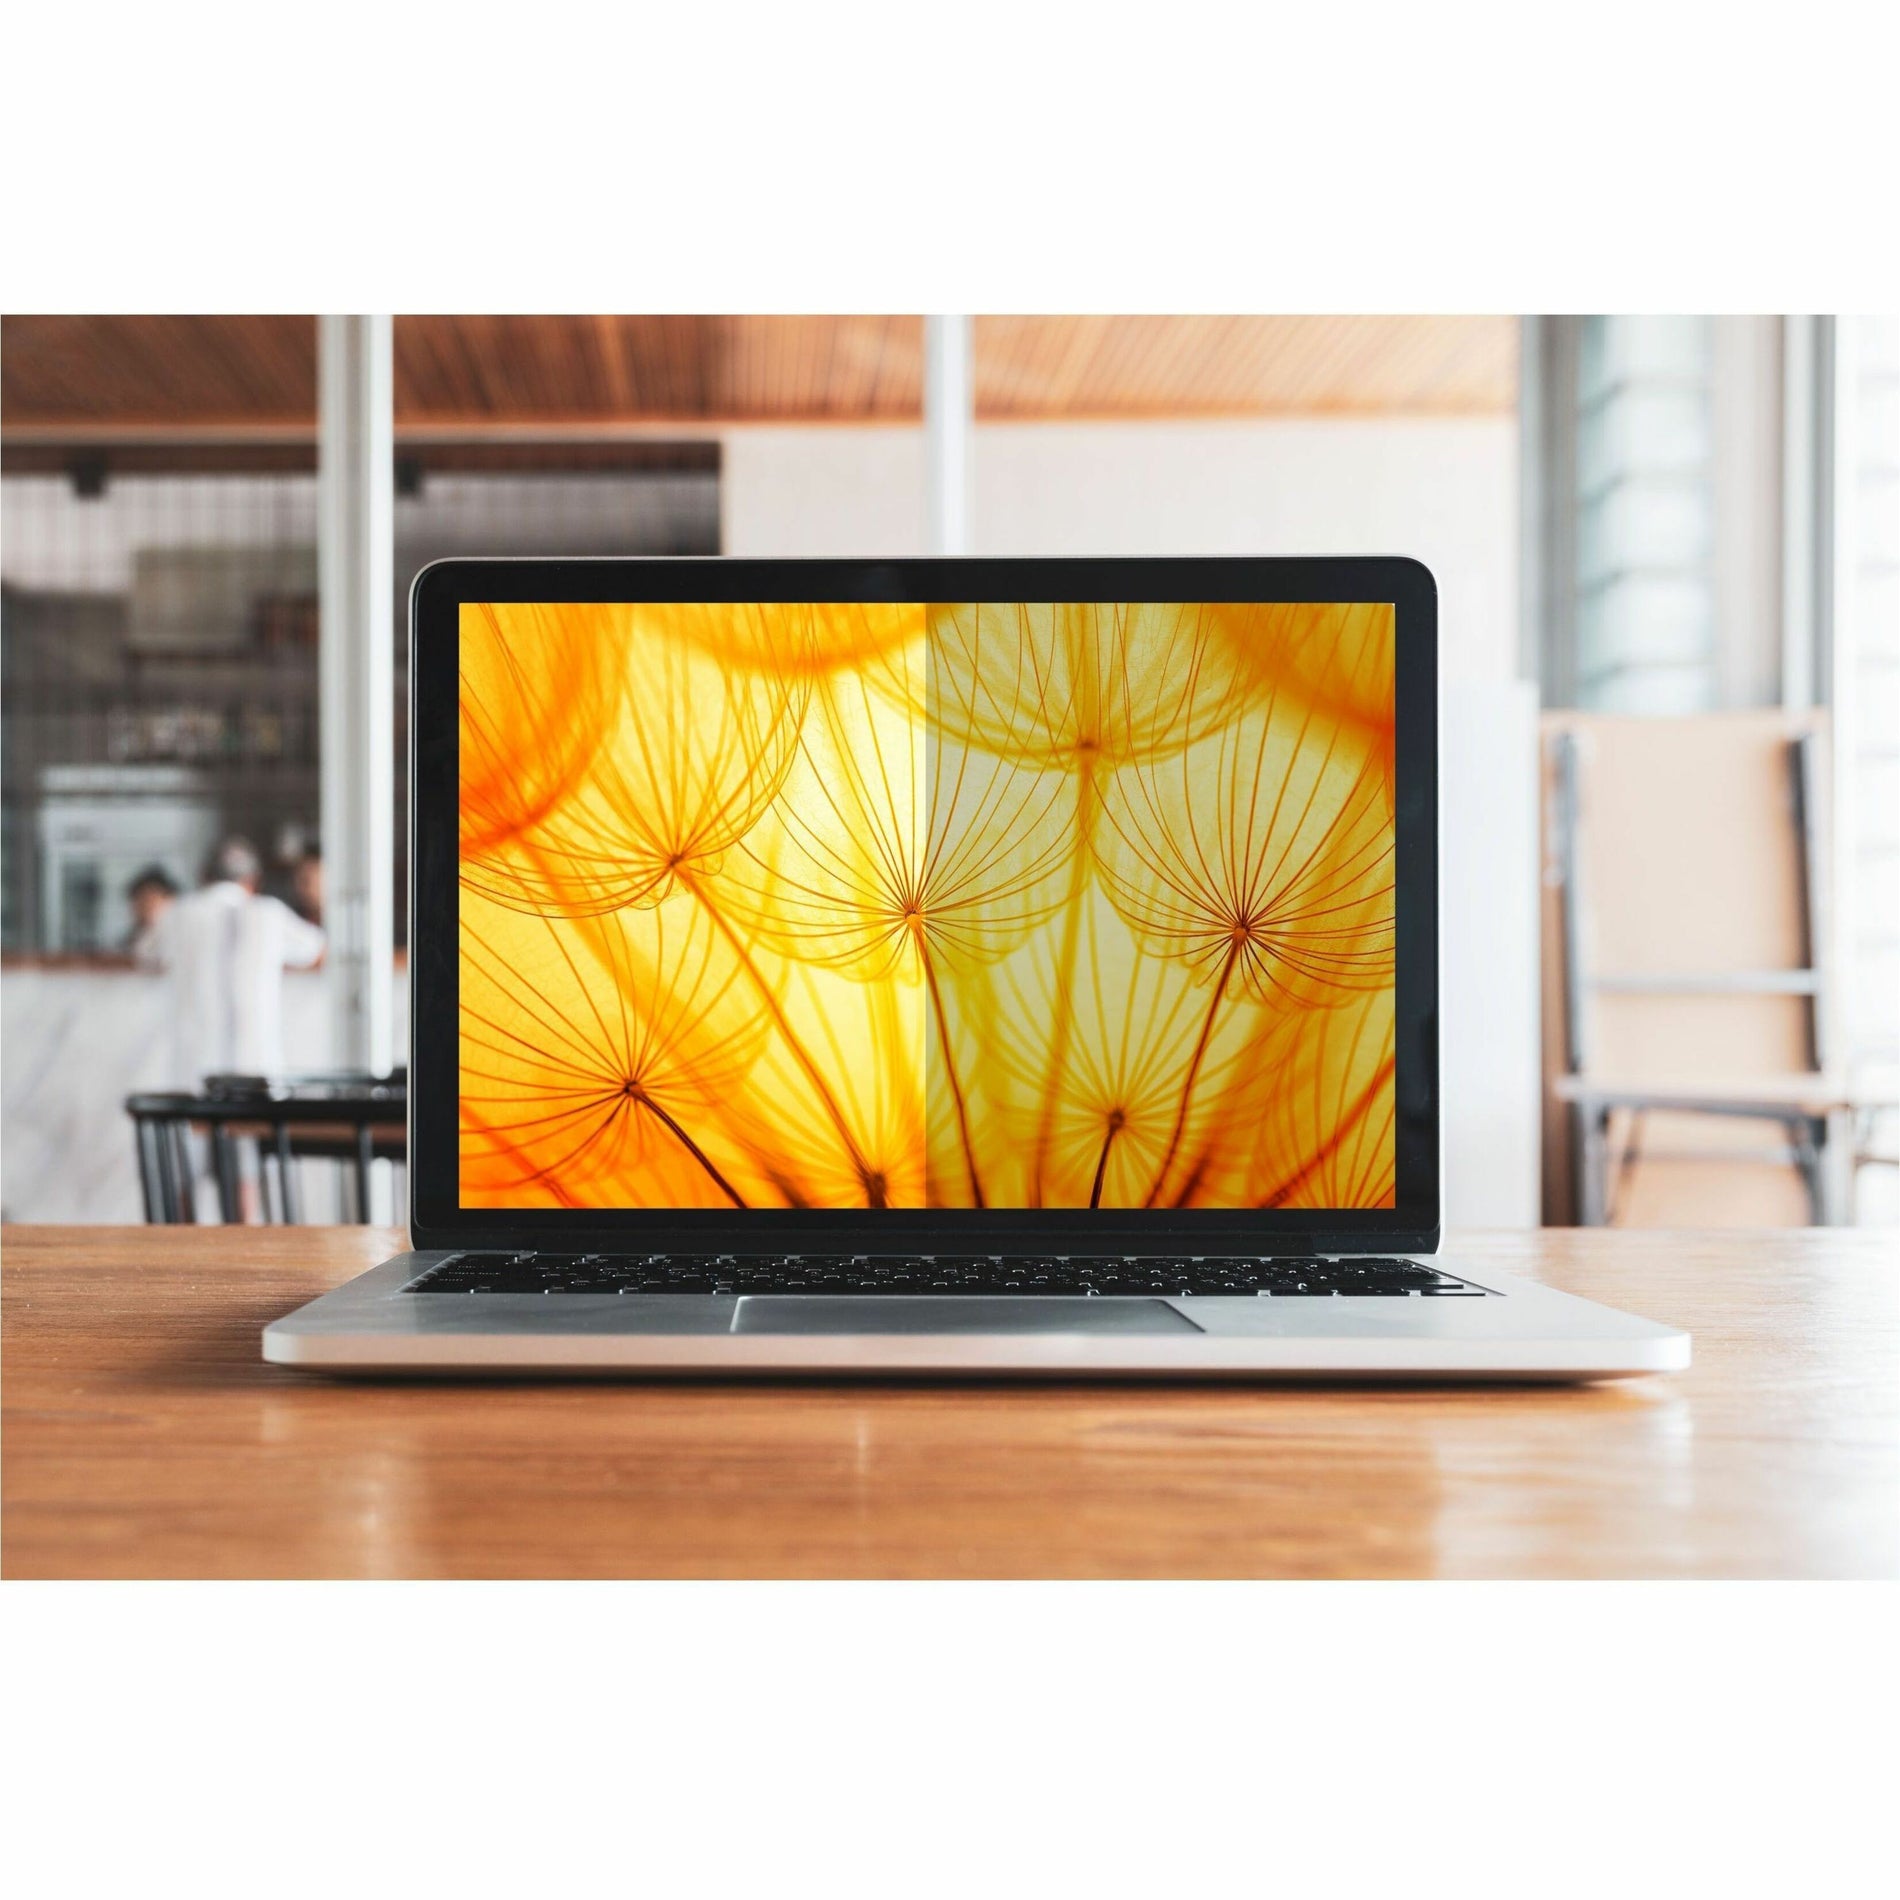 3M BPNAP002 Bright Screen Privacy Filter for Apple MacBook Pro 13 M1-M2, 16:10, Ultra Slim, Easy to Apply, Reversible Matte-to-Glossy